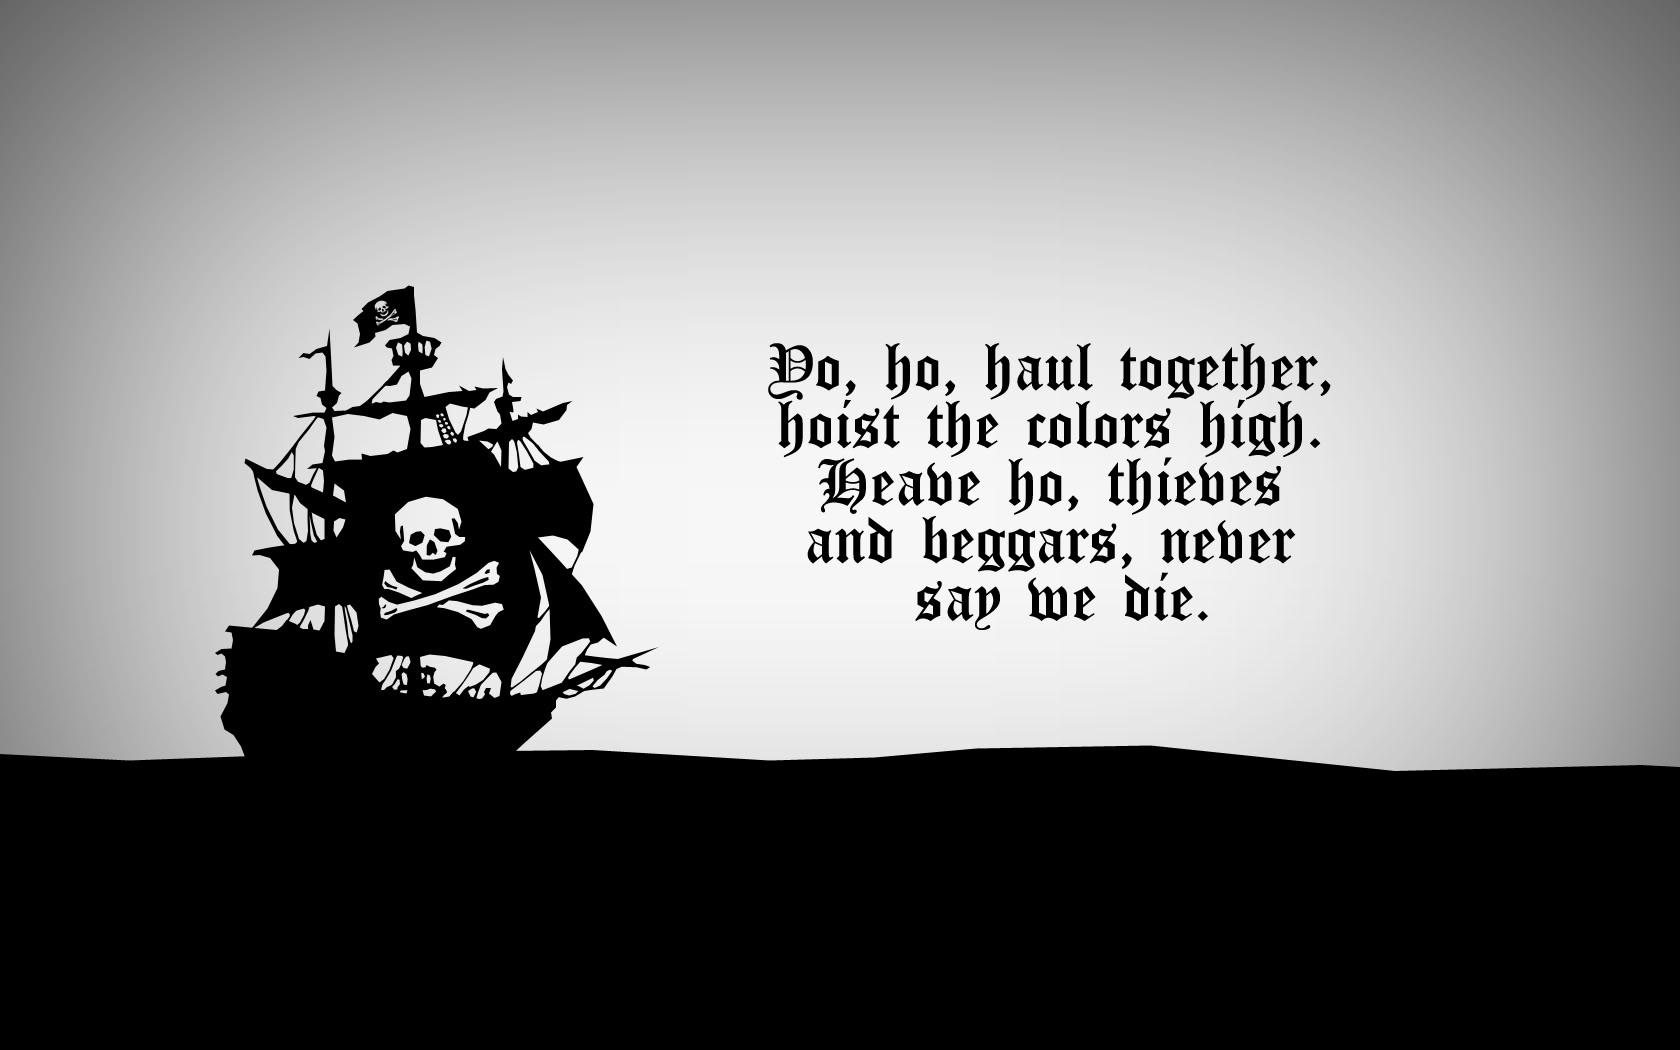 Download the Pirate Bay Pirate Song Wallpaper, Pirate Bay Pirate